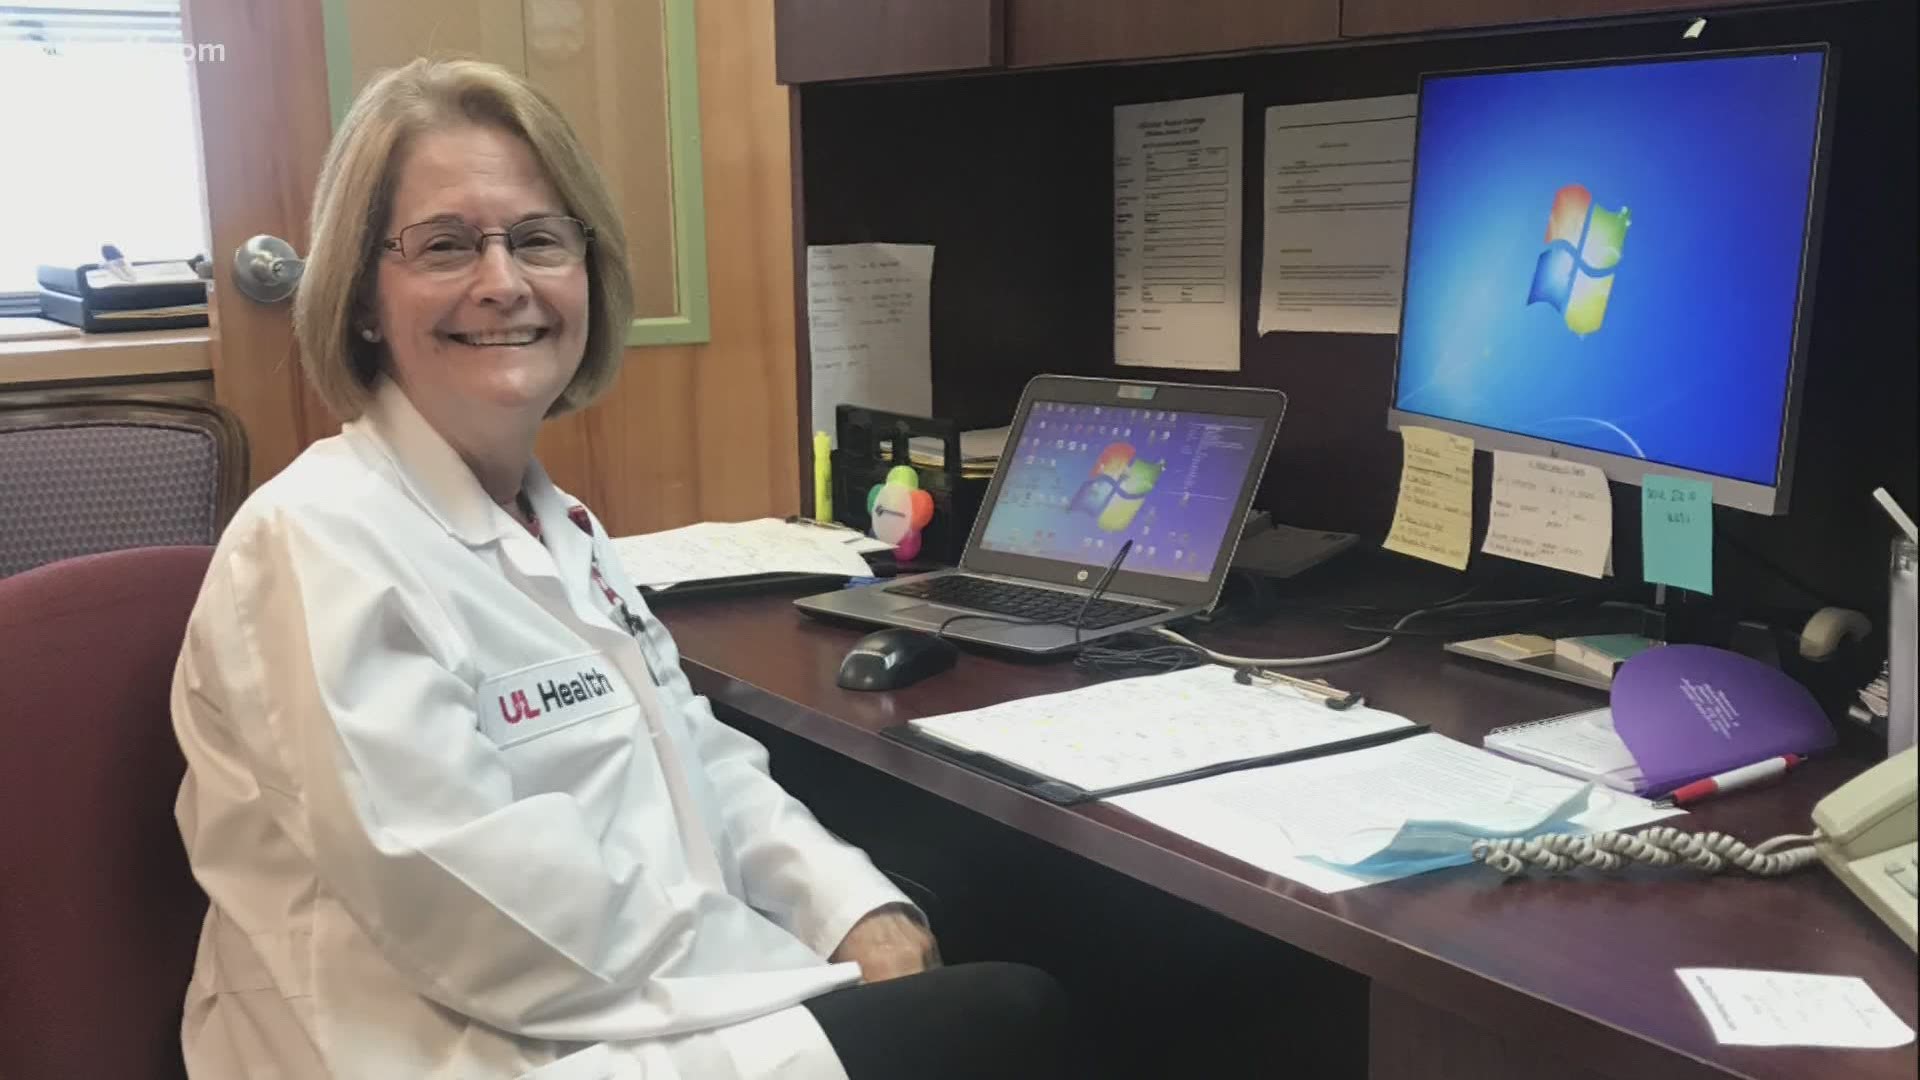 Kathi Hornack is ending her career at UofL Health's Shelbyville Hospital in an unexpected day: during the pandemic.